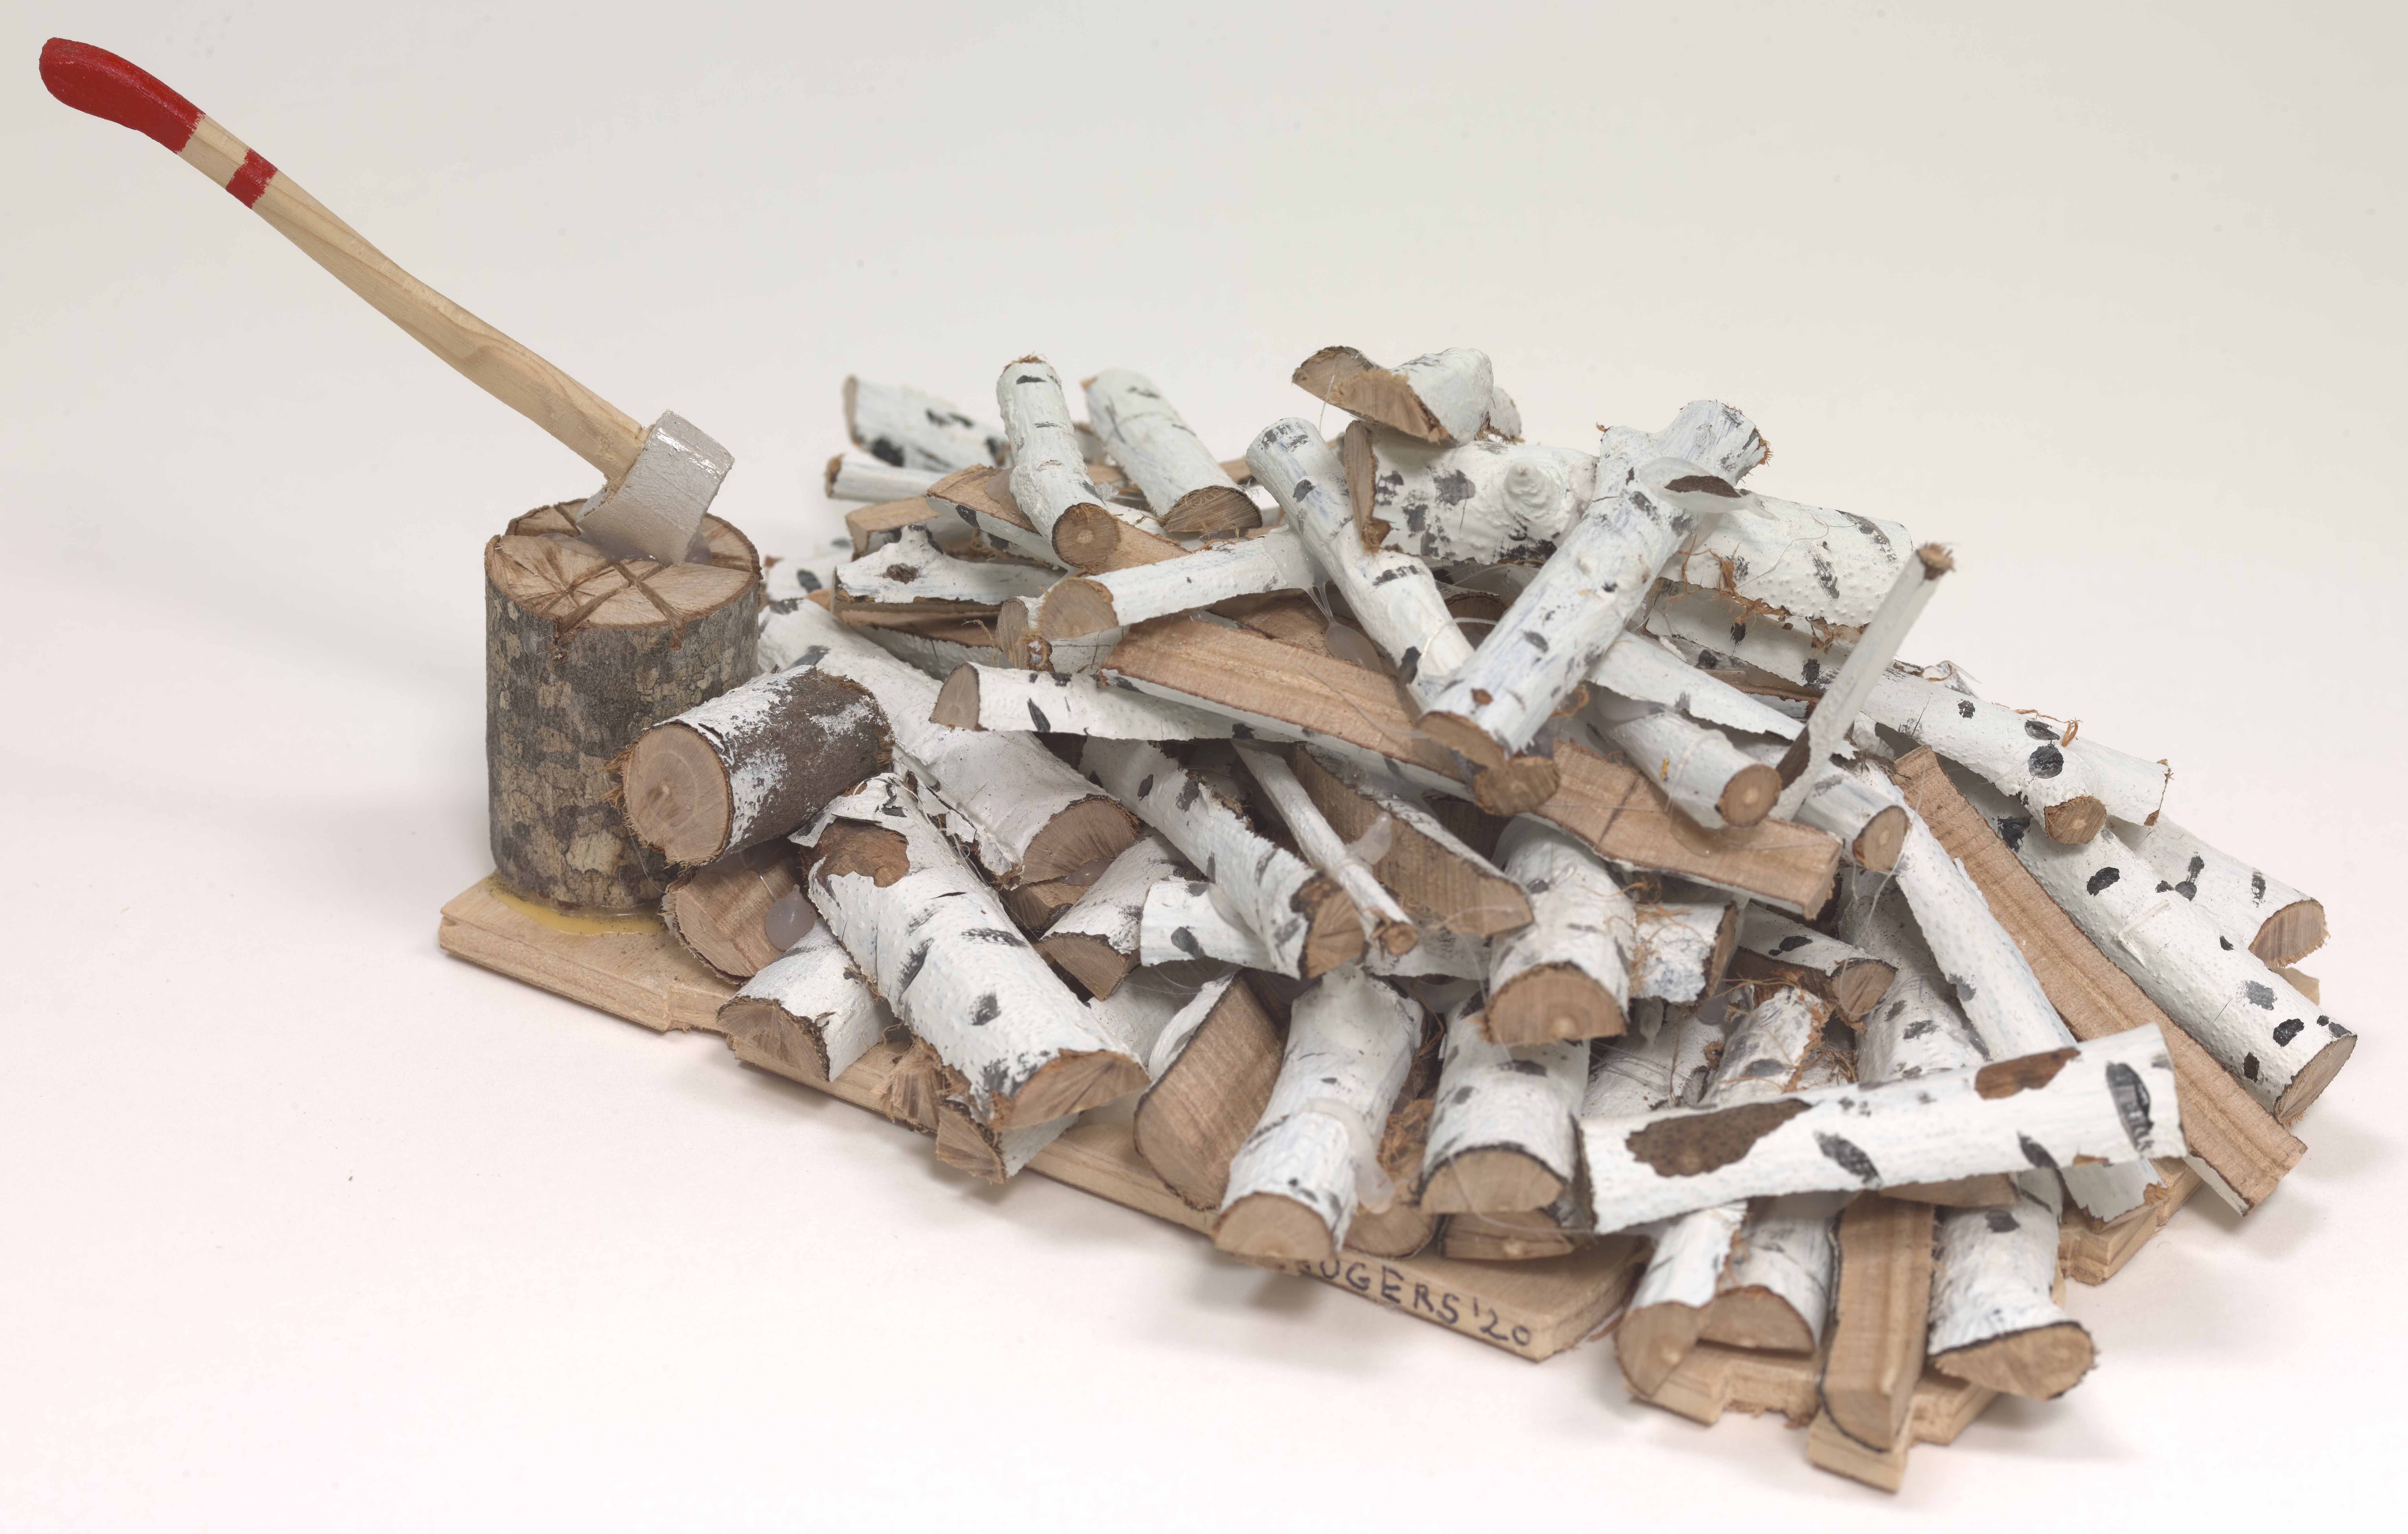 Mac Rogers, Chopping and Stacking Wood, 2020, mixed media, 14 x 11.5 inches